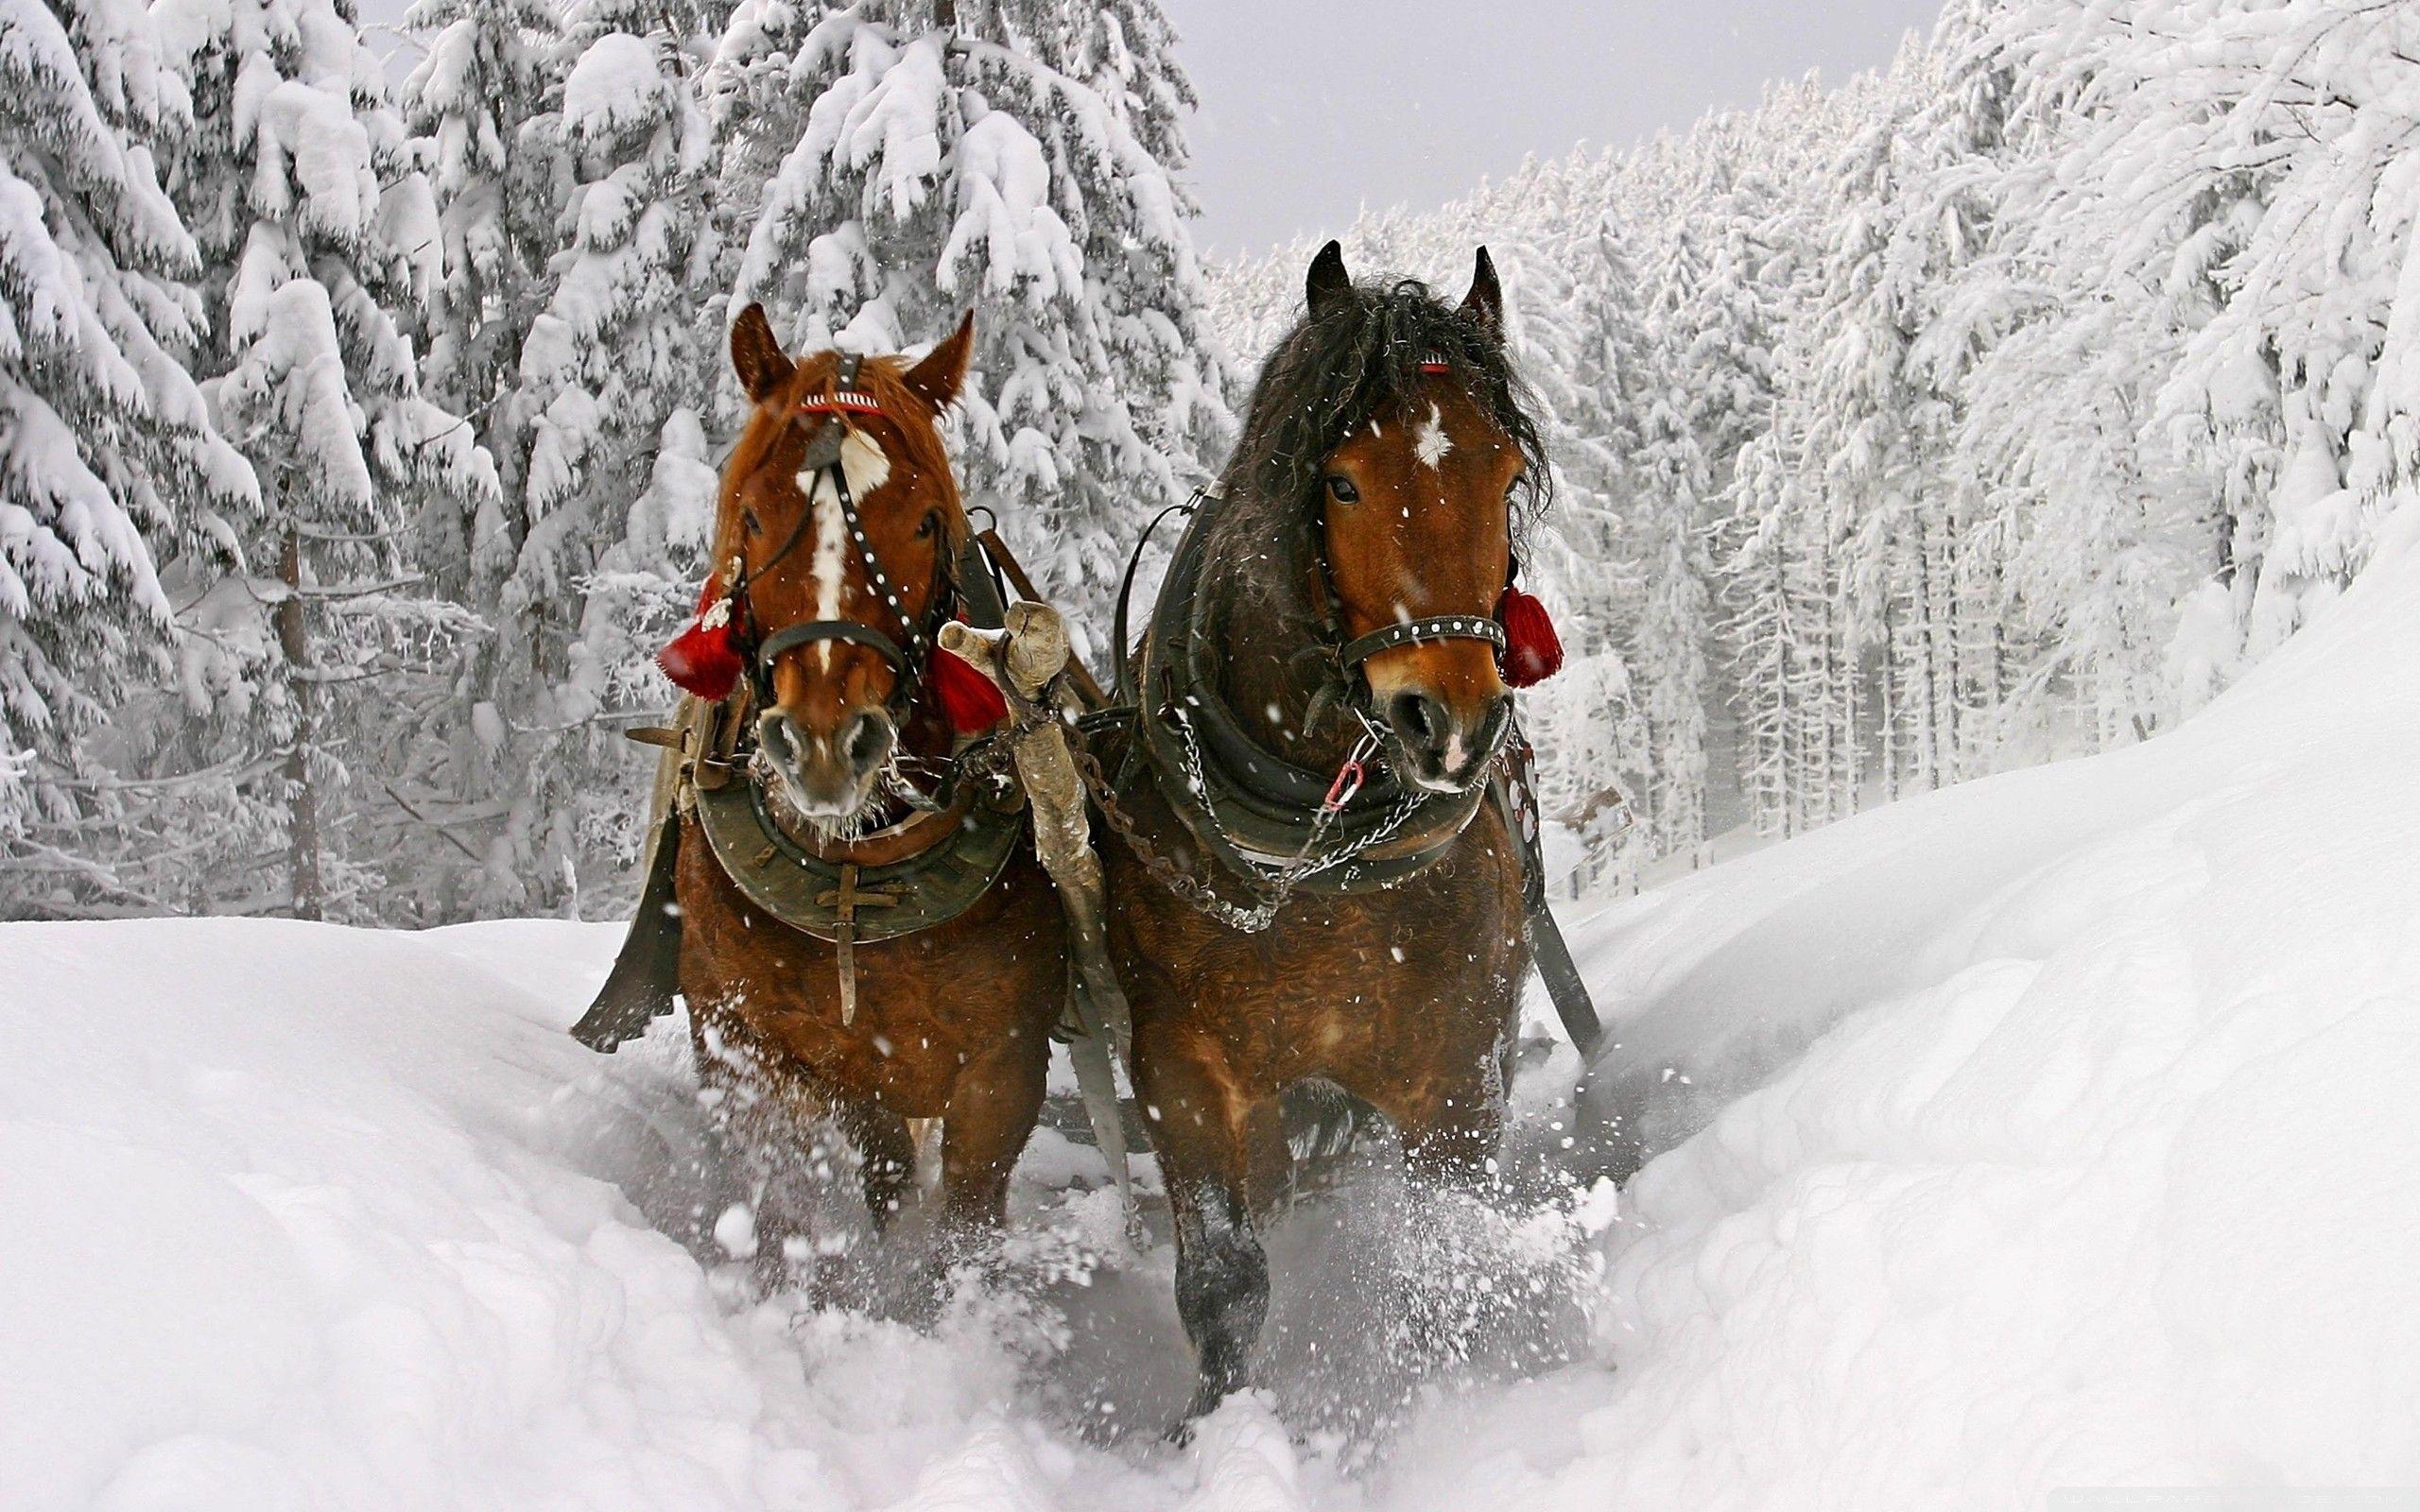 Winter Horse Wallpapers Top Free Winter Horse Backgrounds